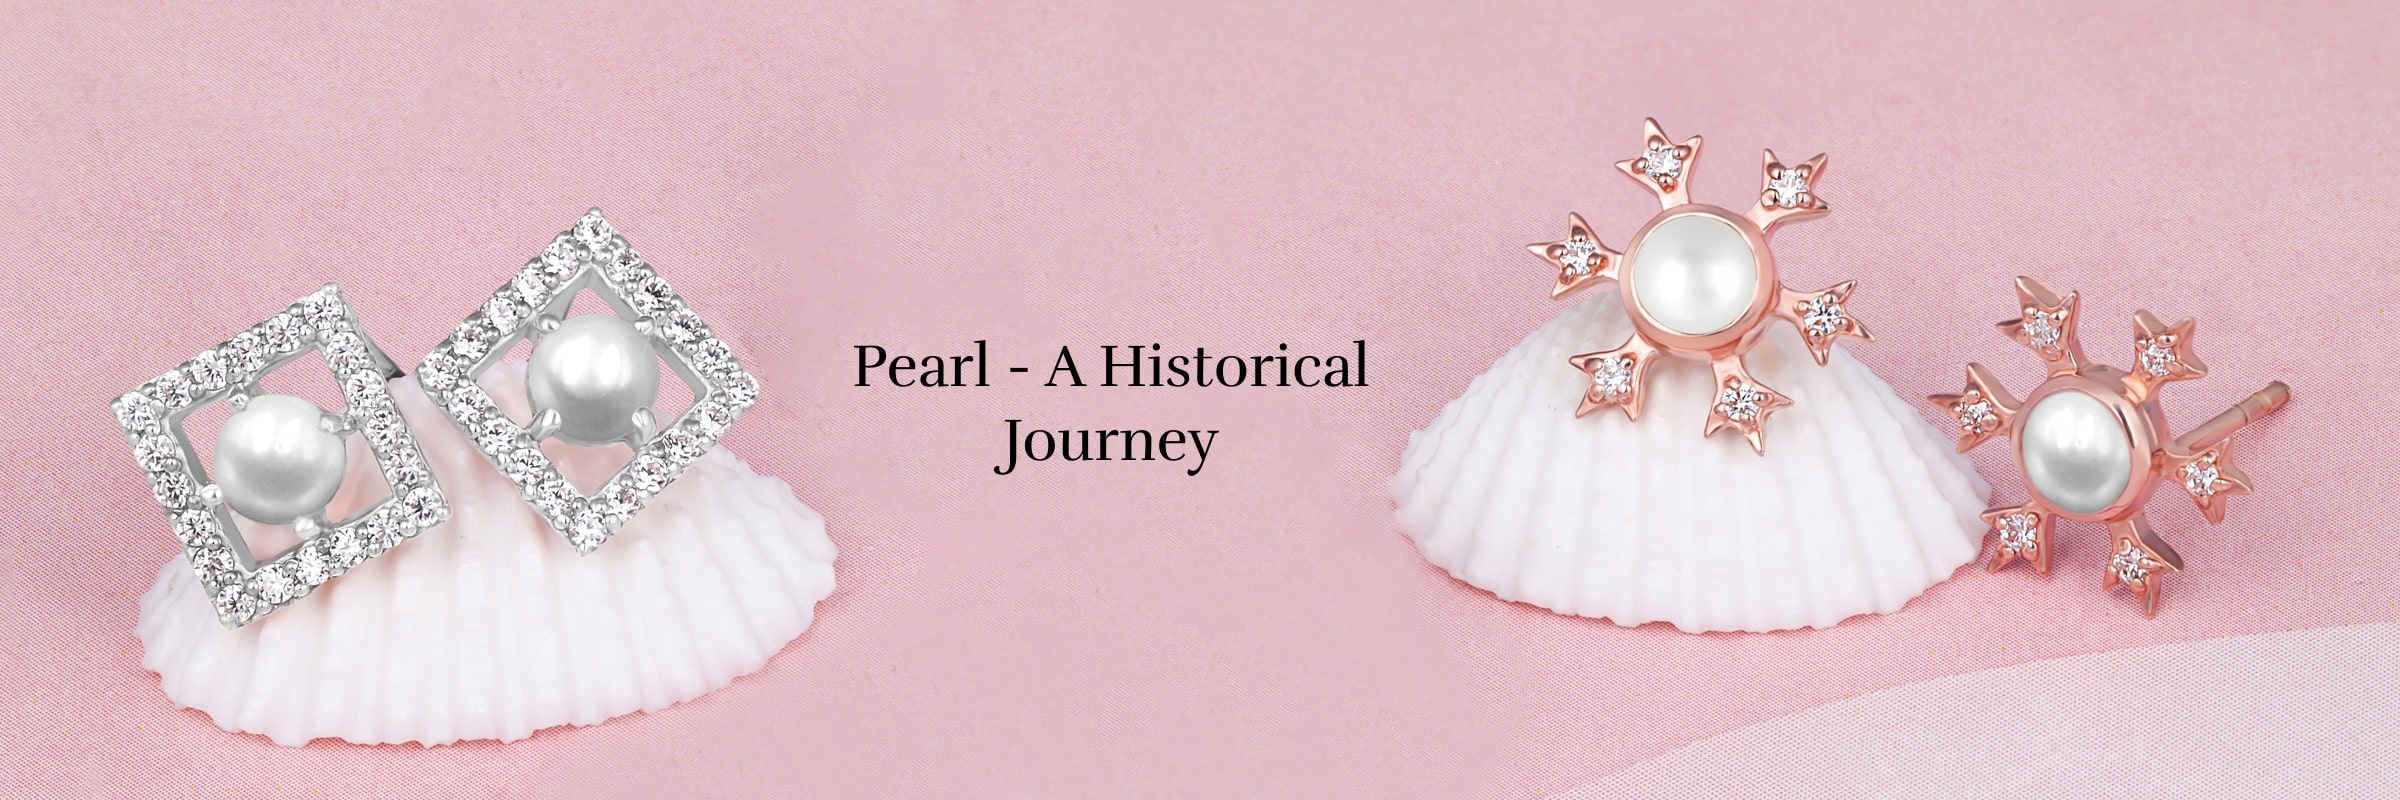 History of Pearl Stone